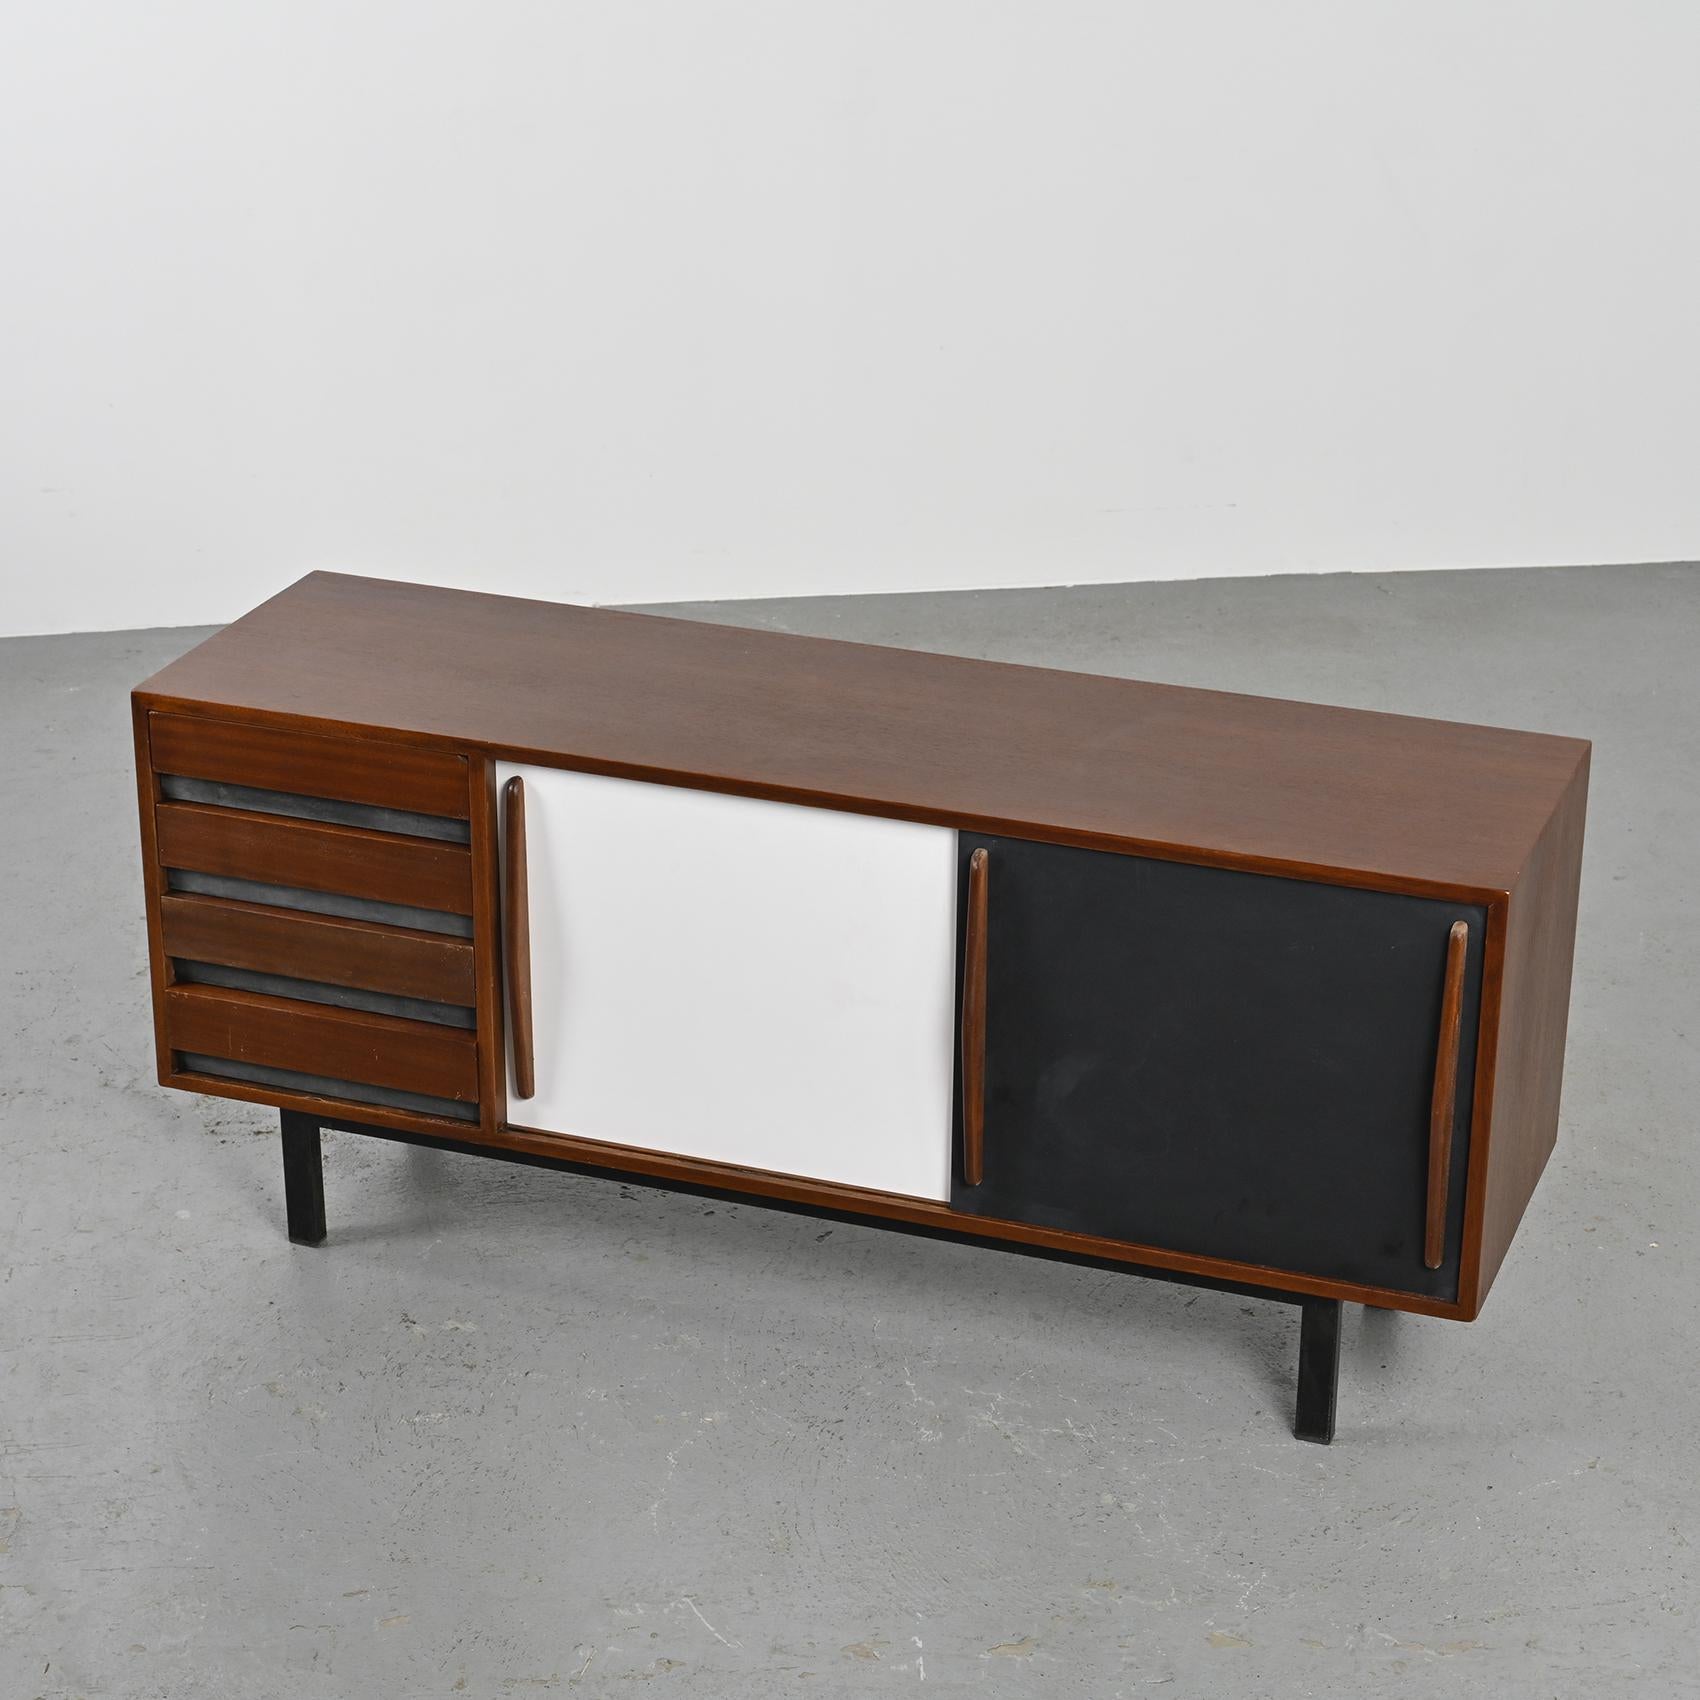 French Cansado Sideboard by Charlotte Perriand, Steph Simon circa 1960